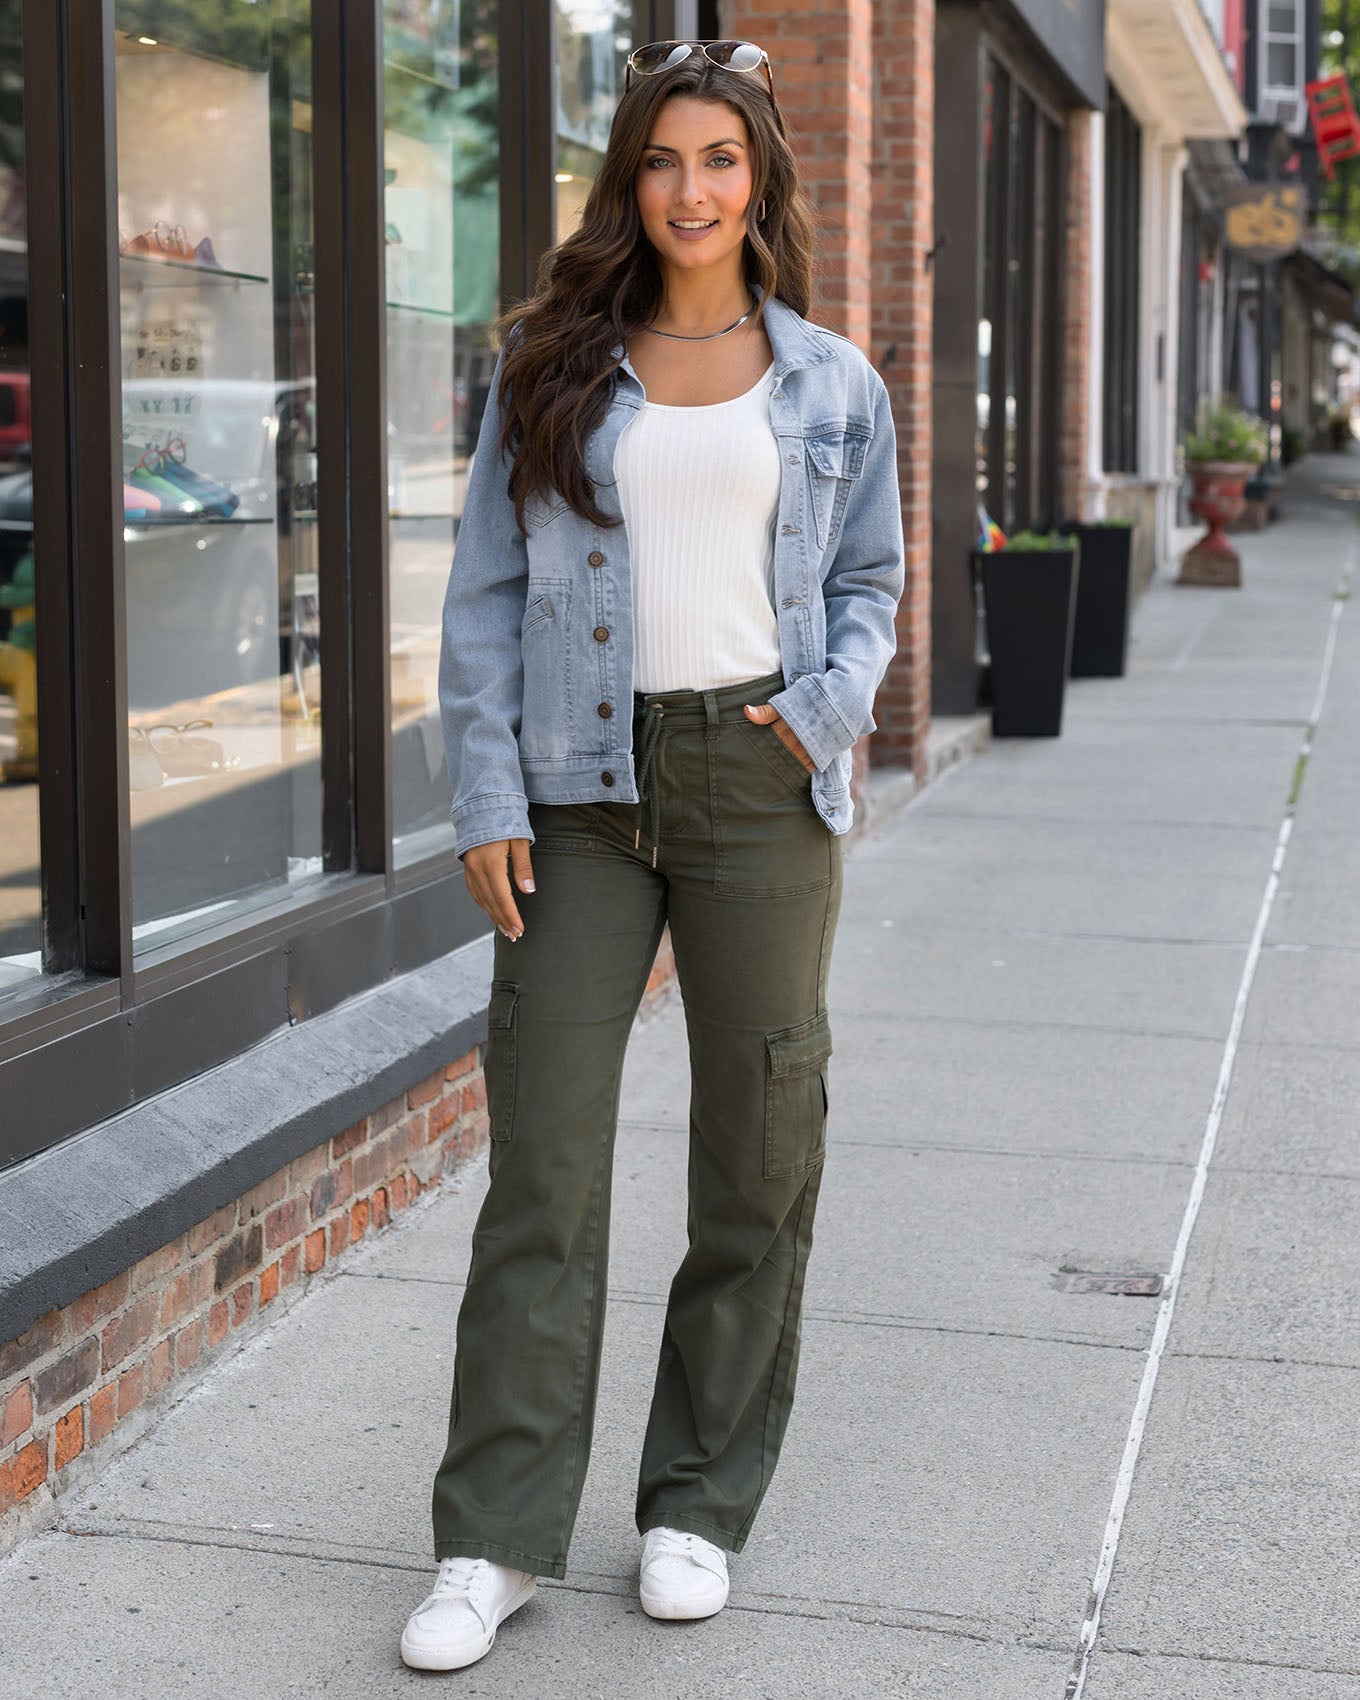 Green Cargo Pants Outfits (31 ideas & outfits)